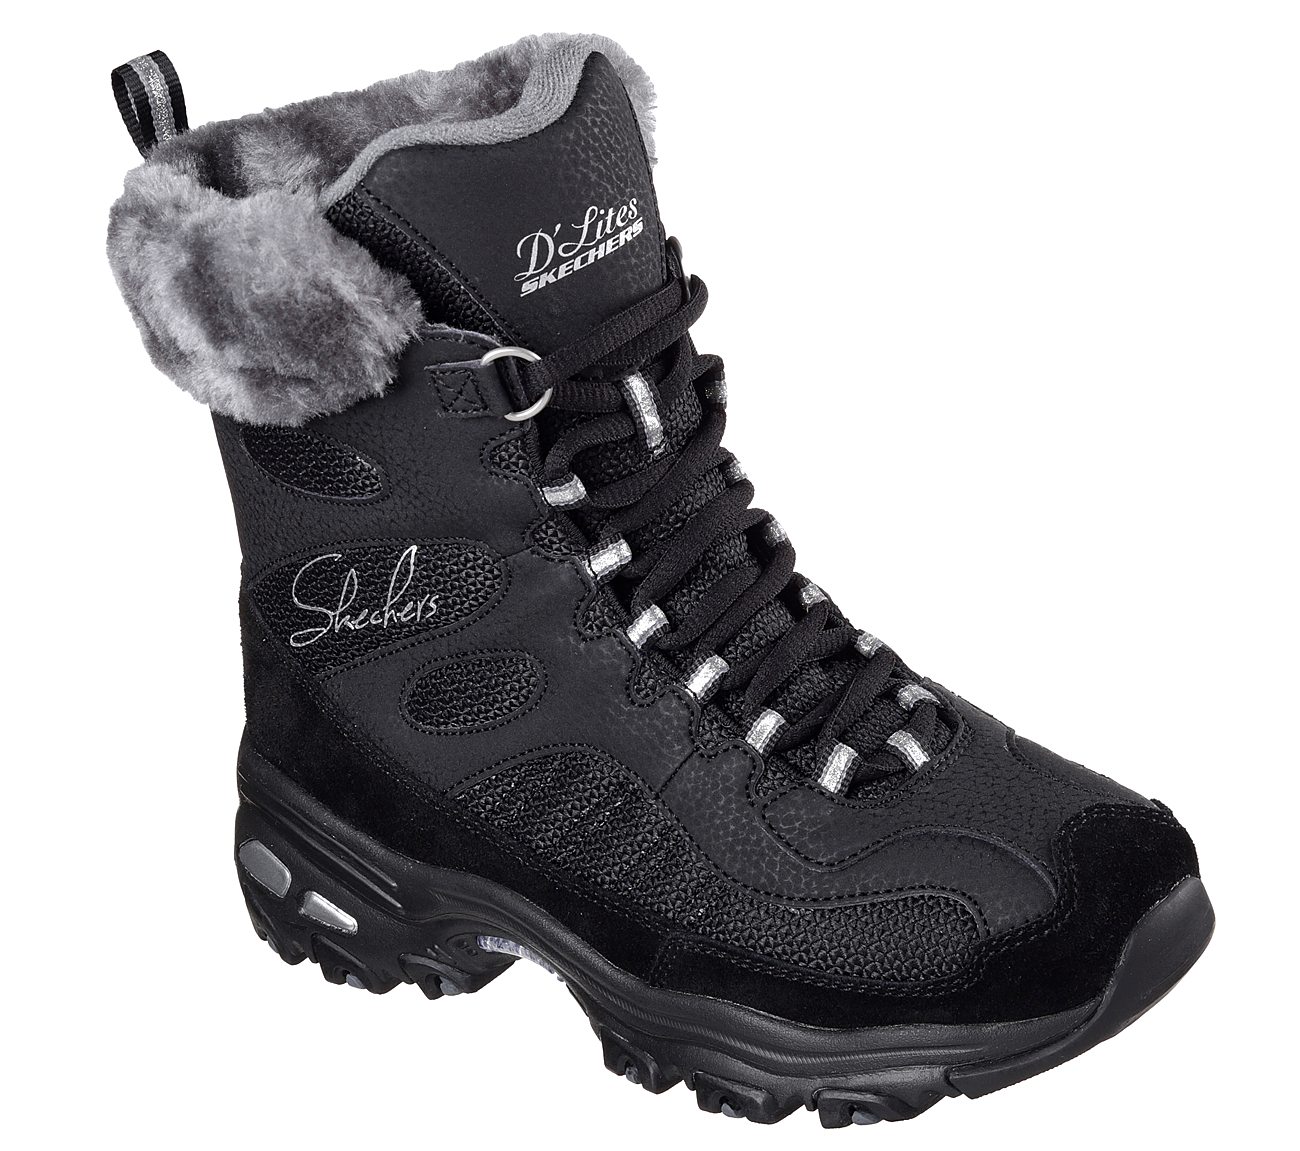 skechers toasty toes boots \u003e Factory Store